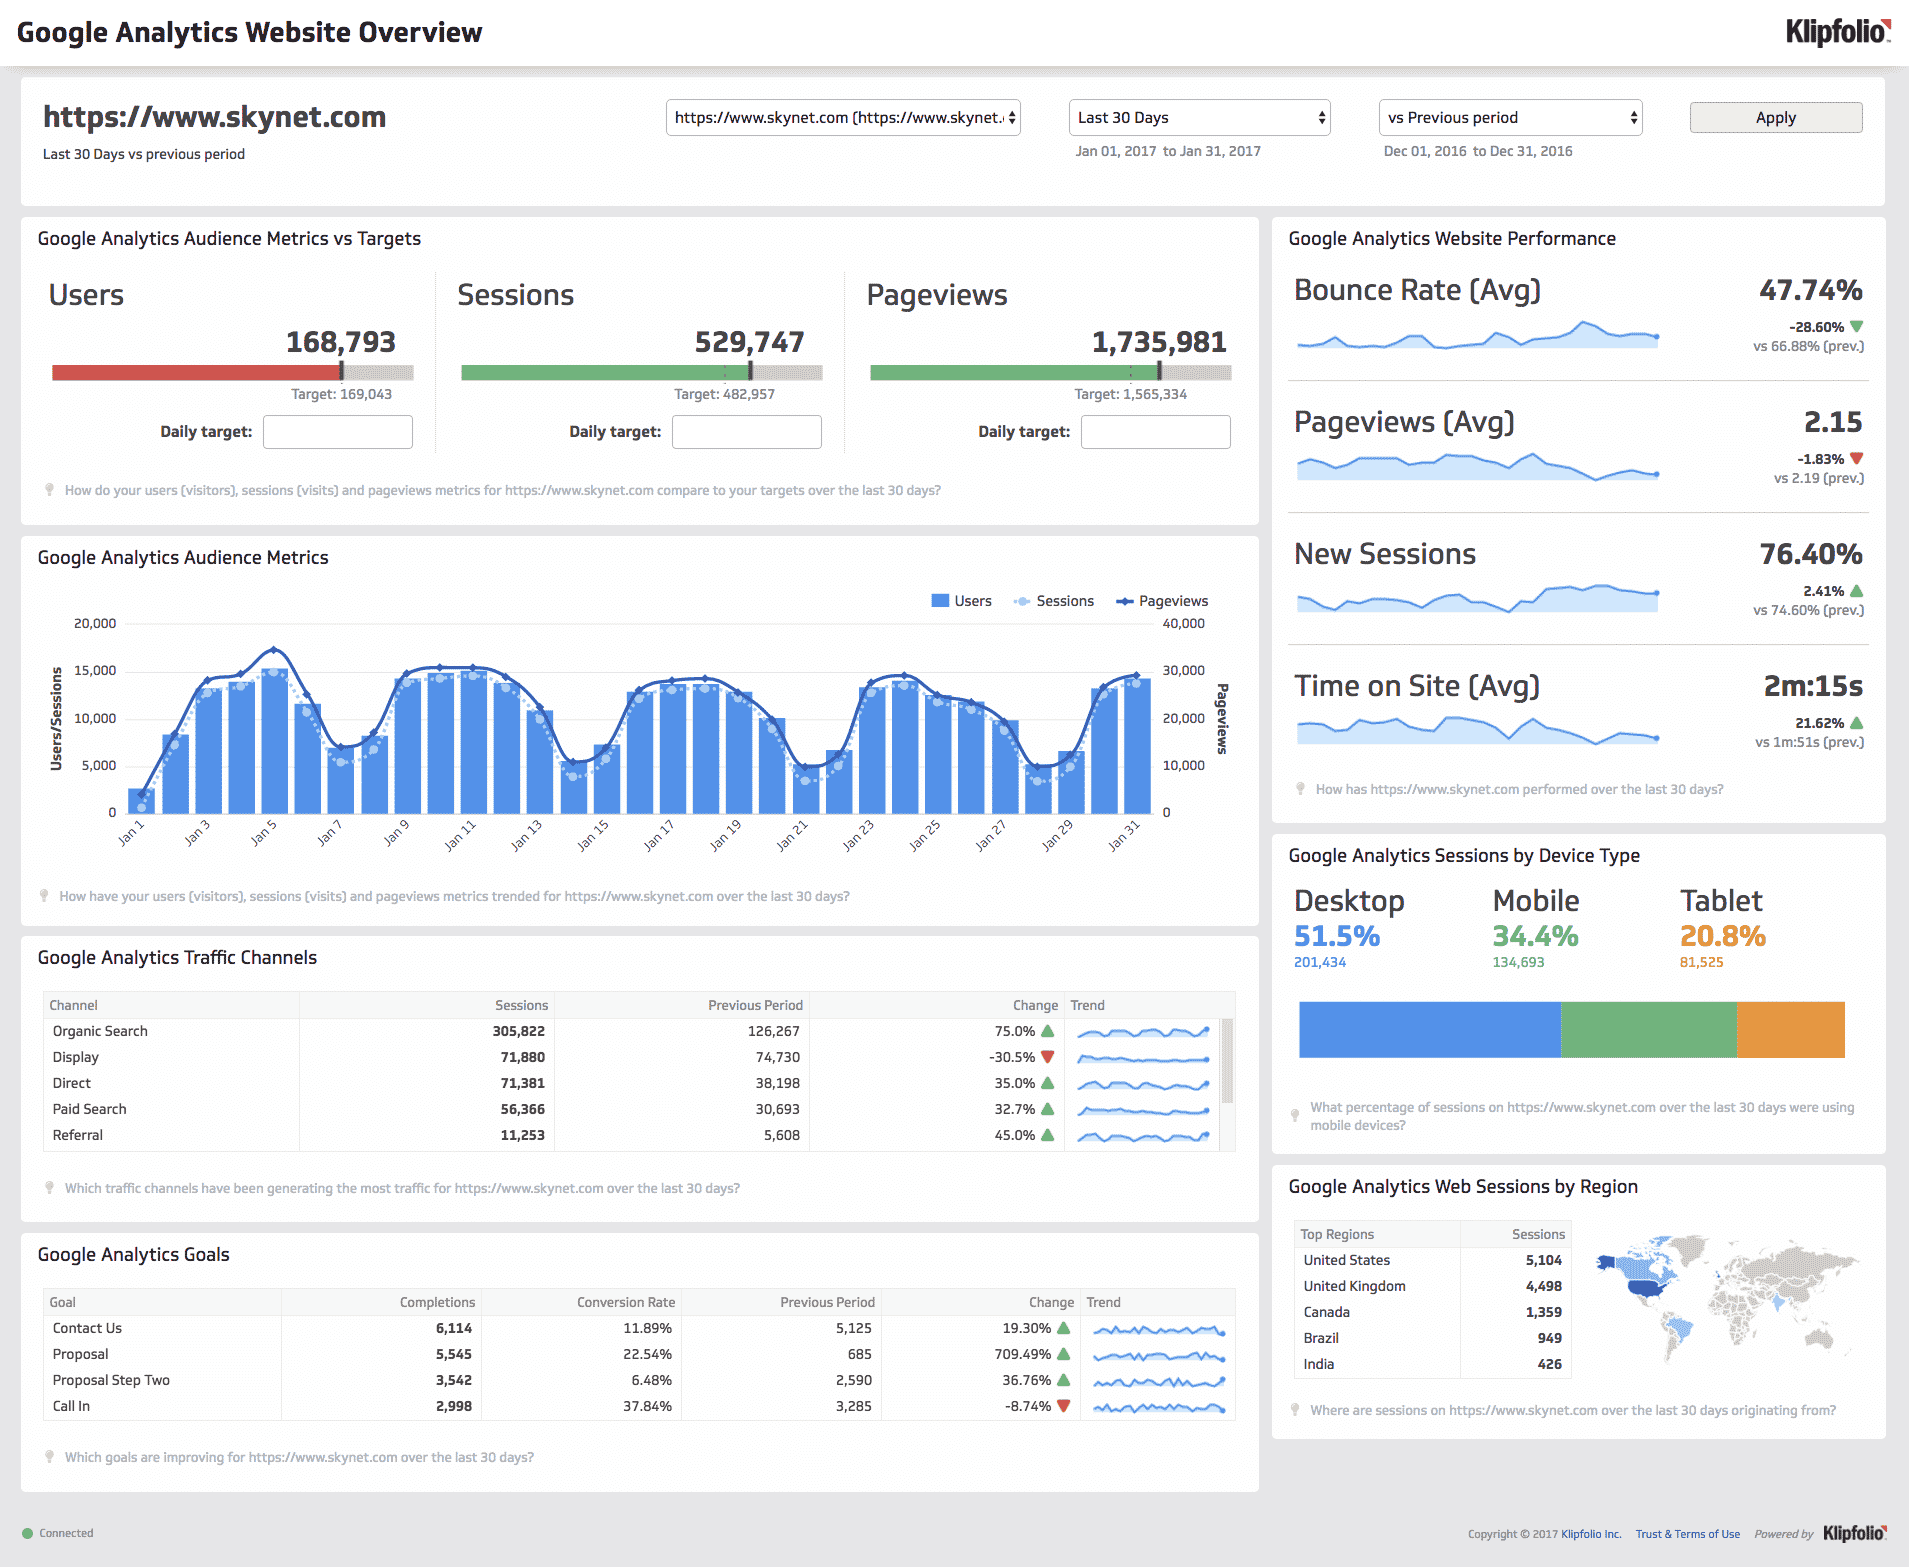 Track your marketing performance with reporting